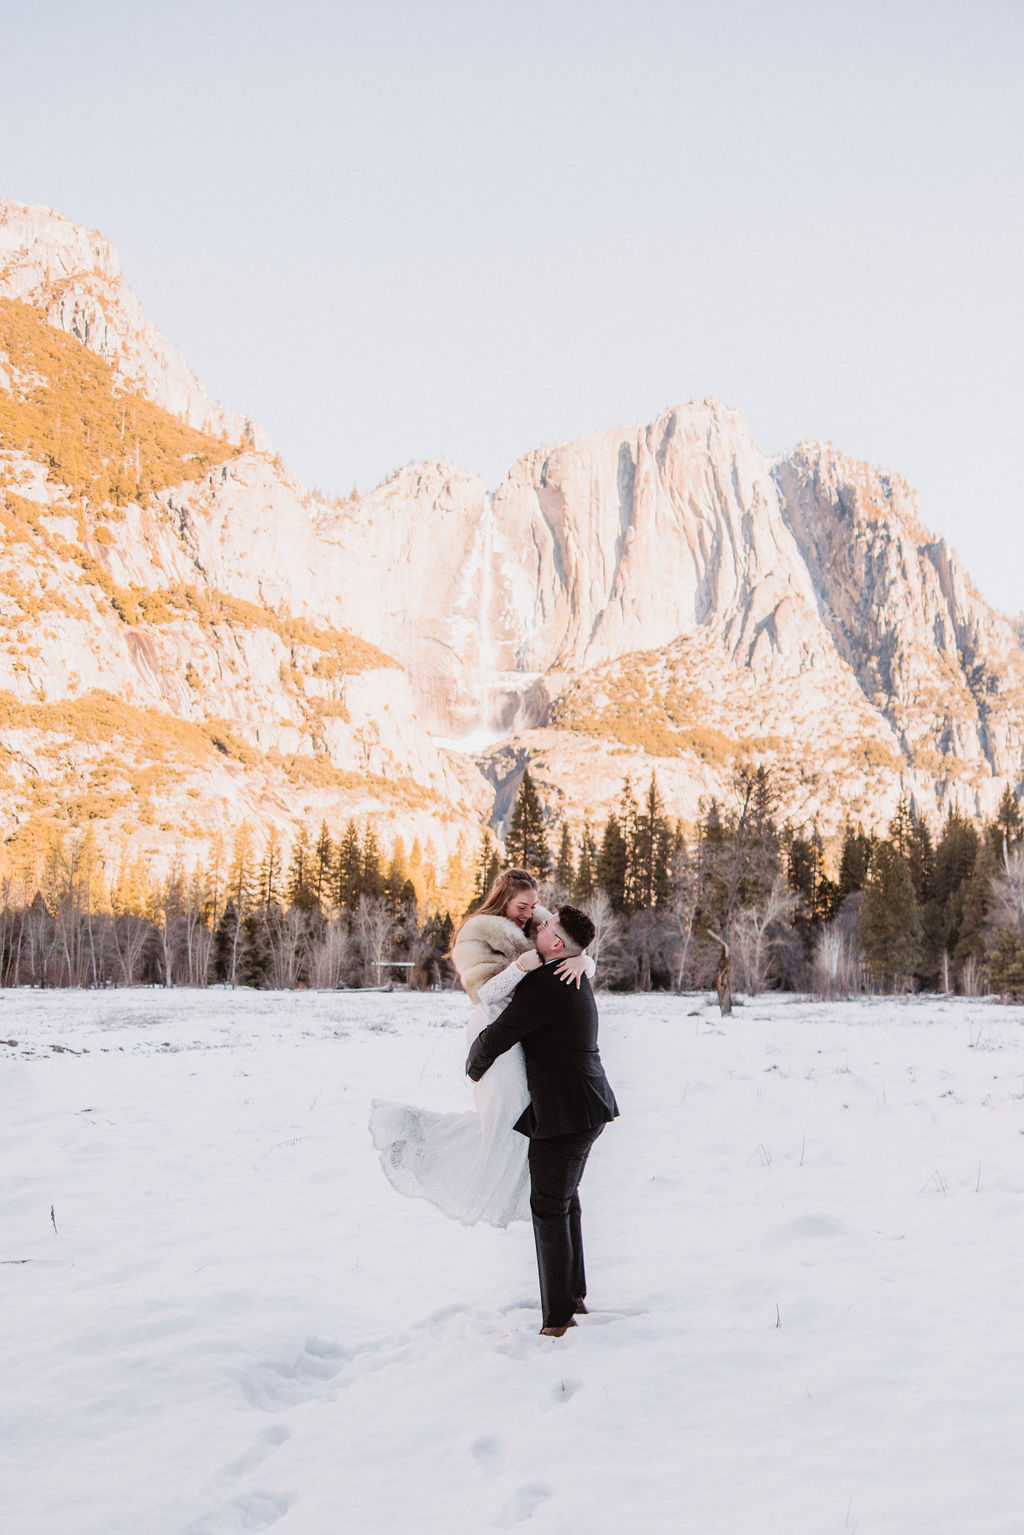 A couple in wedding attire sharing a playful moment in a snowy landscape with a mountain in the background ay Yosemite National Park